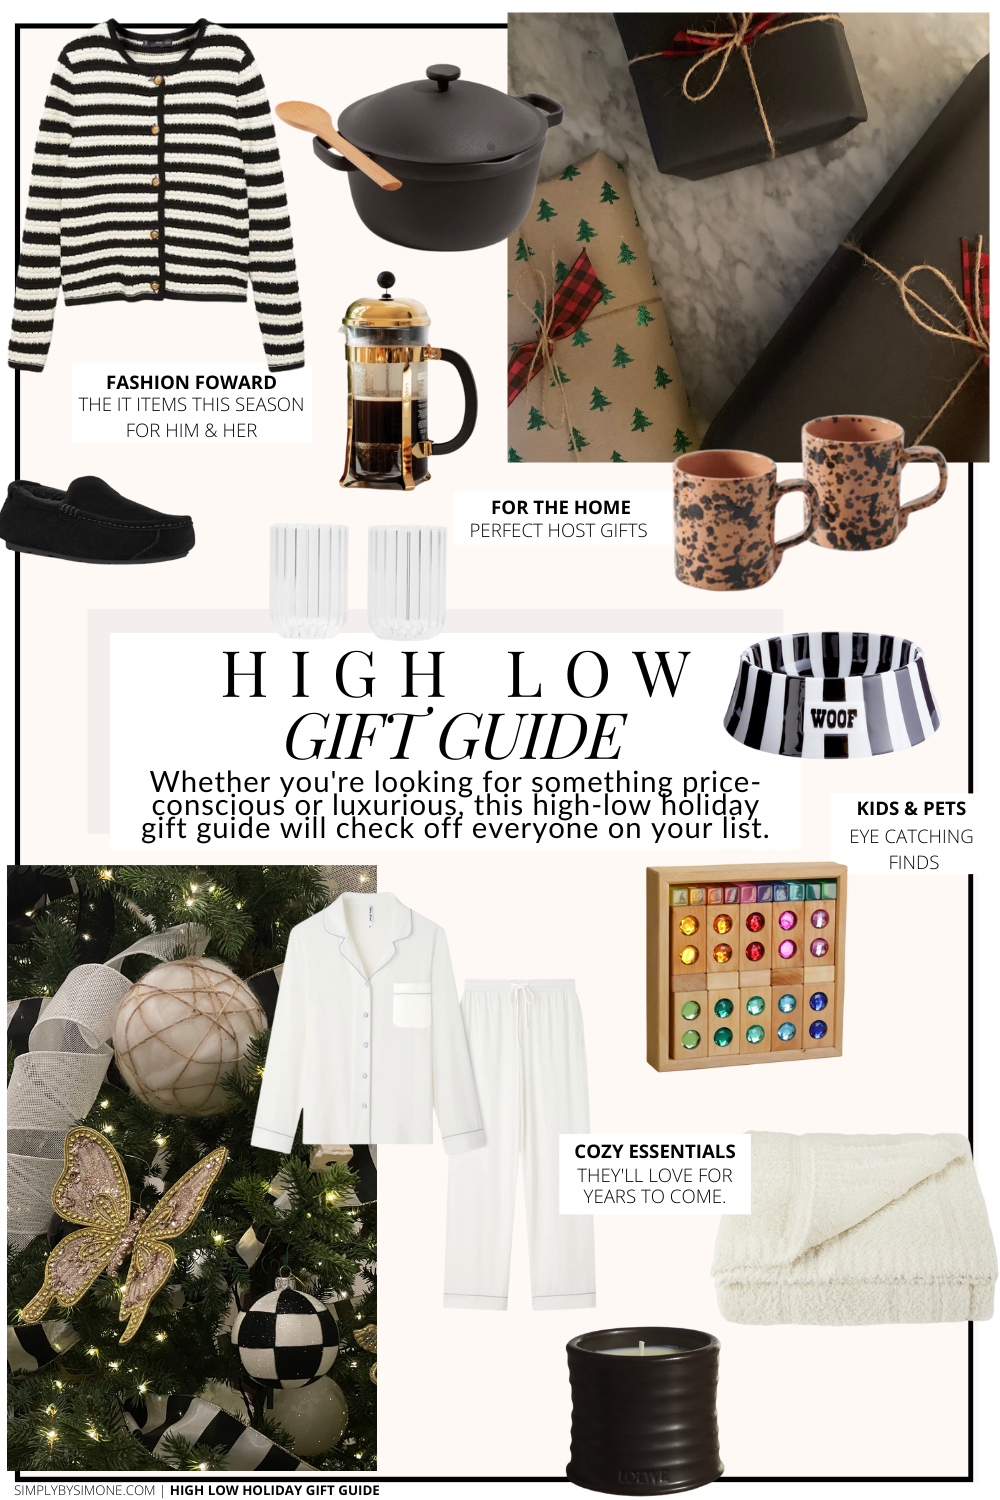 Exceptional Gifts At Any Price: High Low Holiday Gift Guide